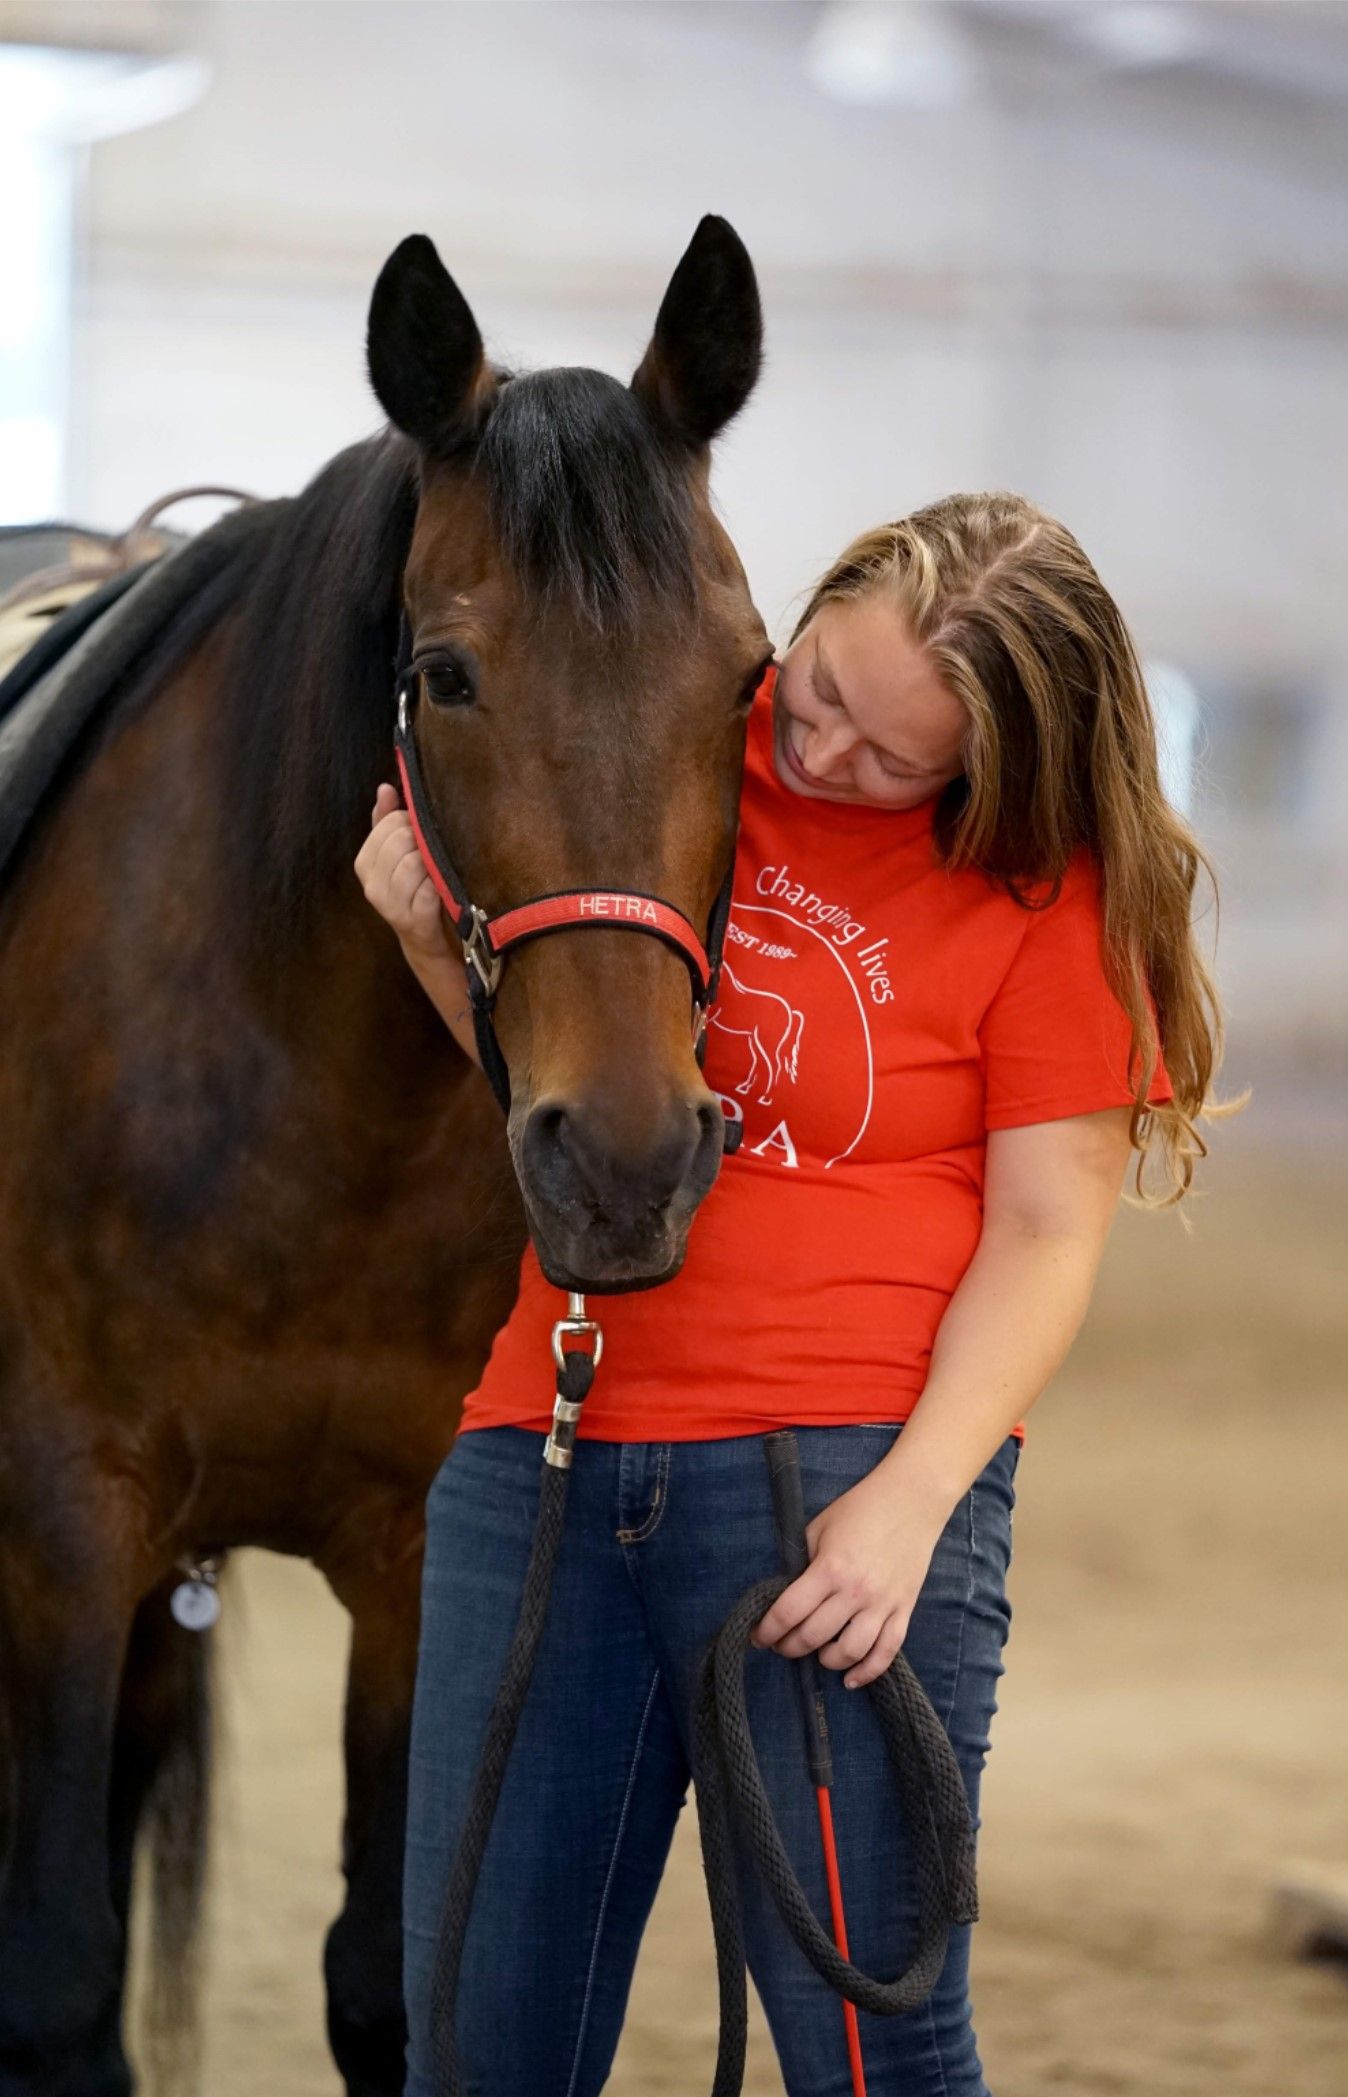 Equine Facilitated Psychotherapy